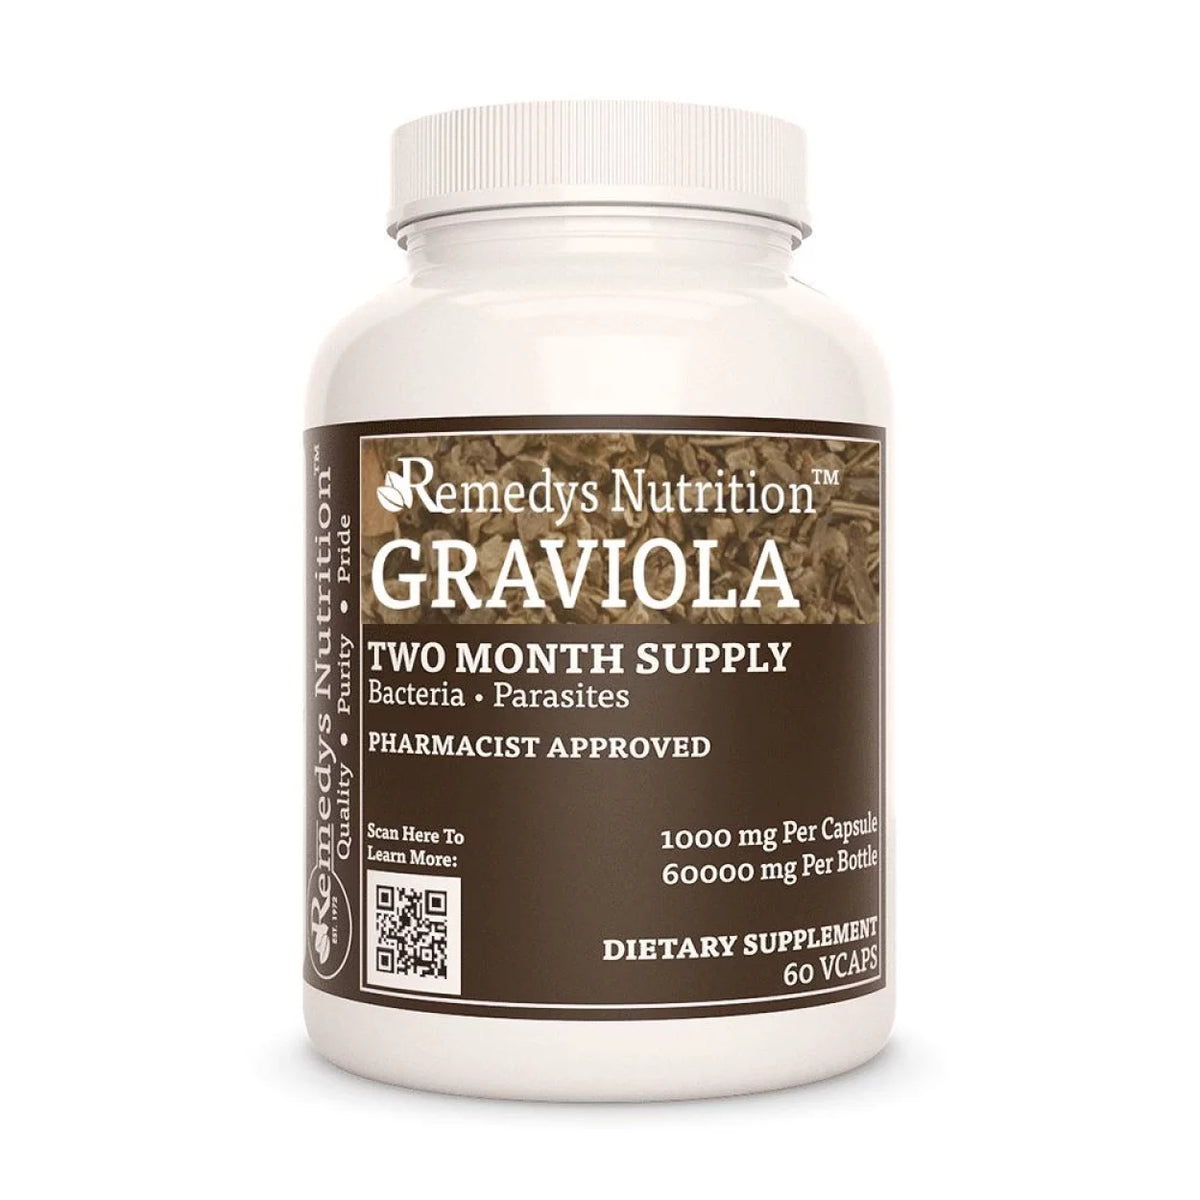 Image of Remedy's Nutrition® Graviola Capsules Dietary Herbal Supplement front bottle. Made in the USA.